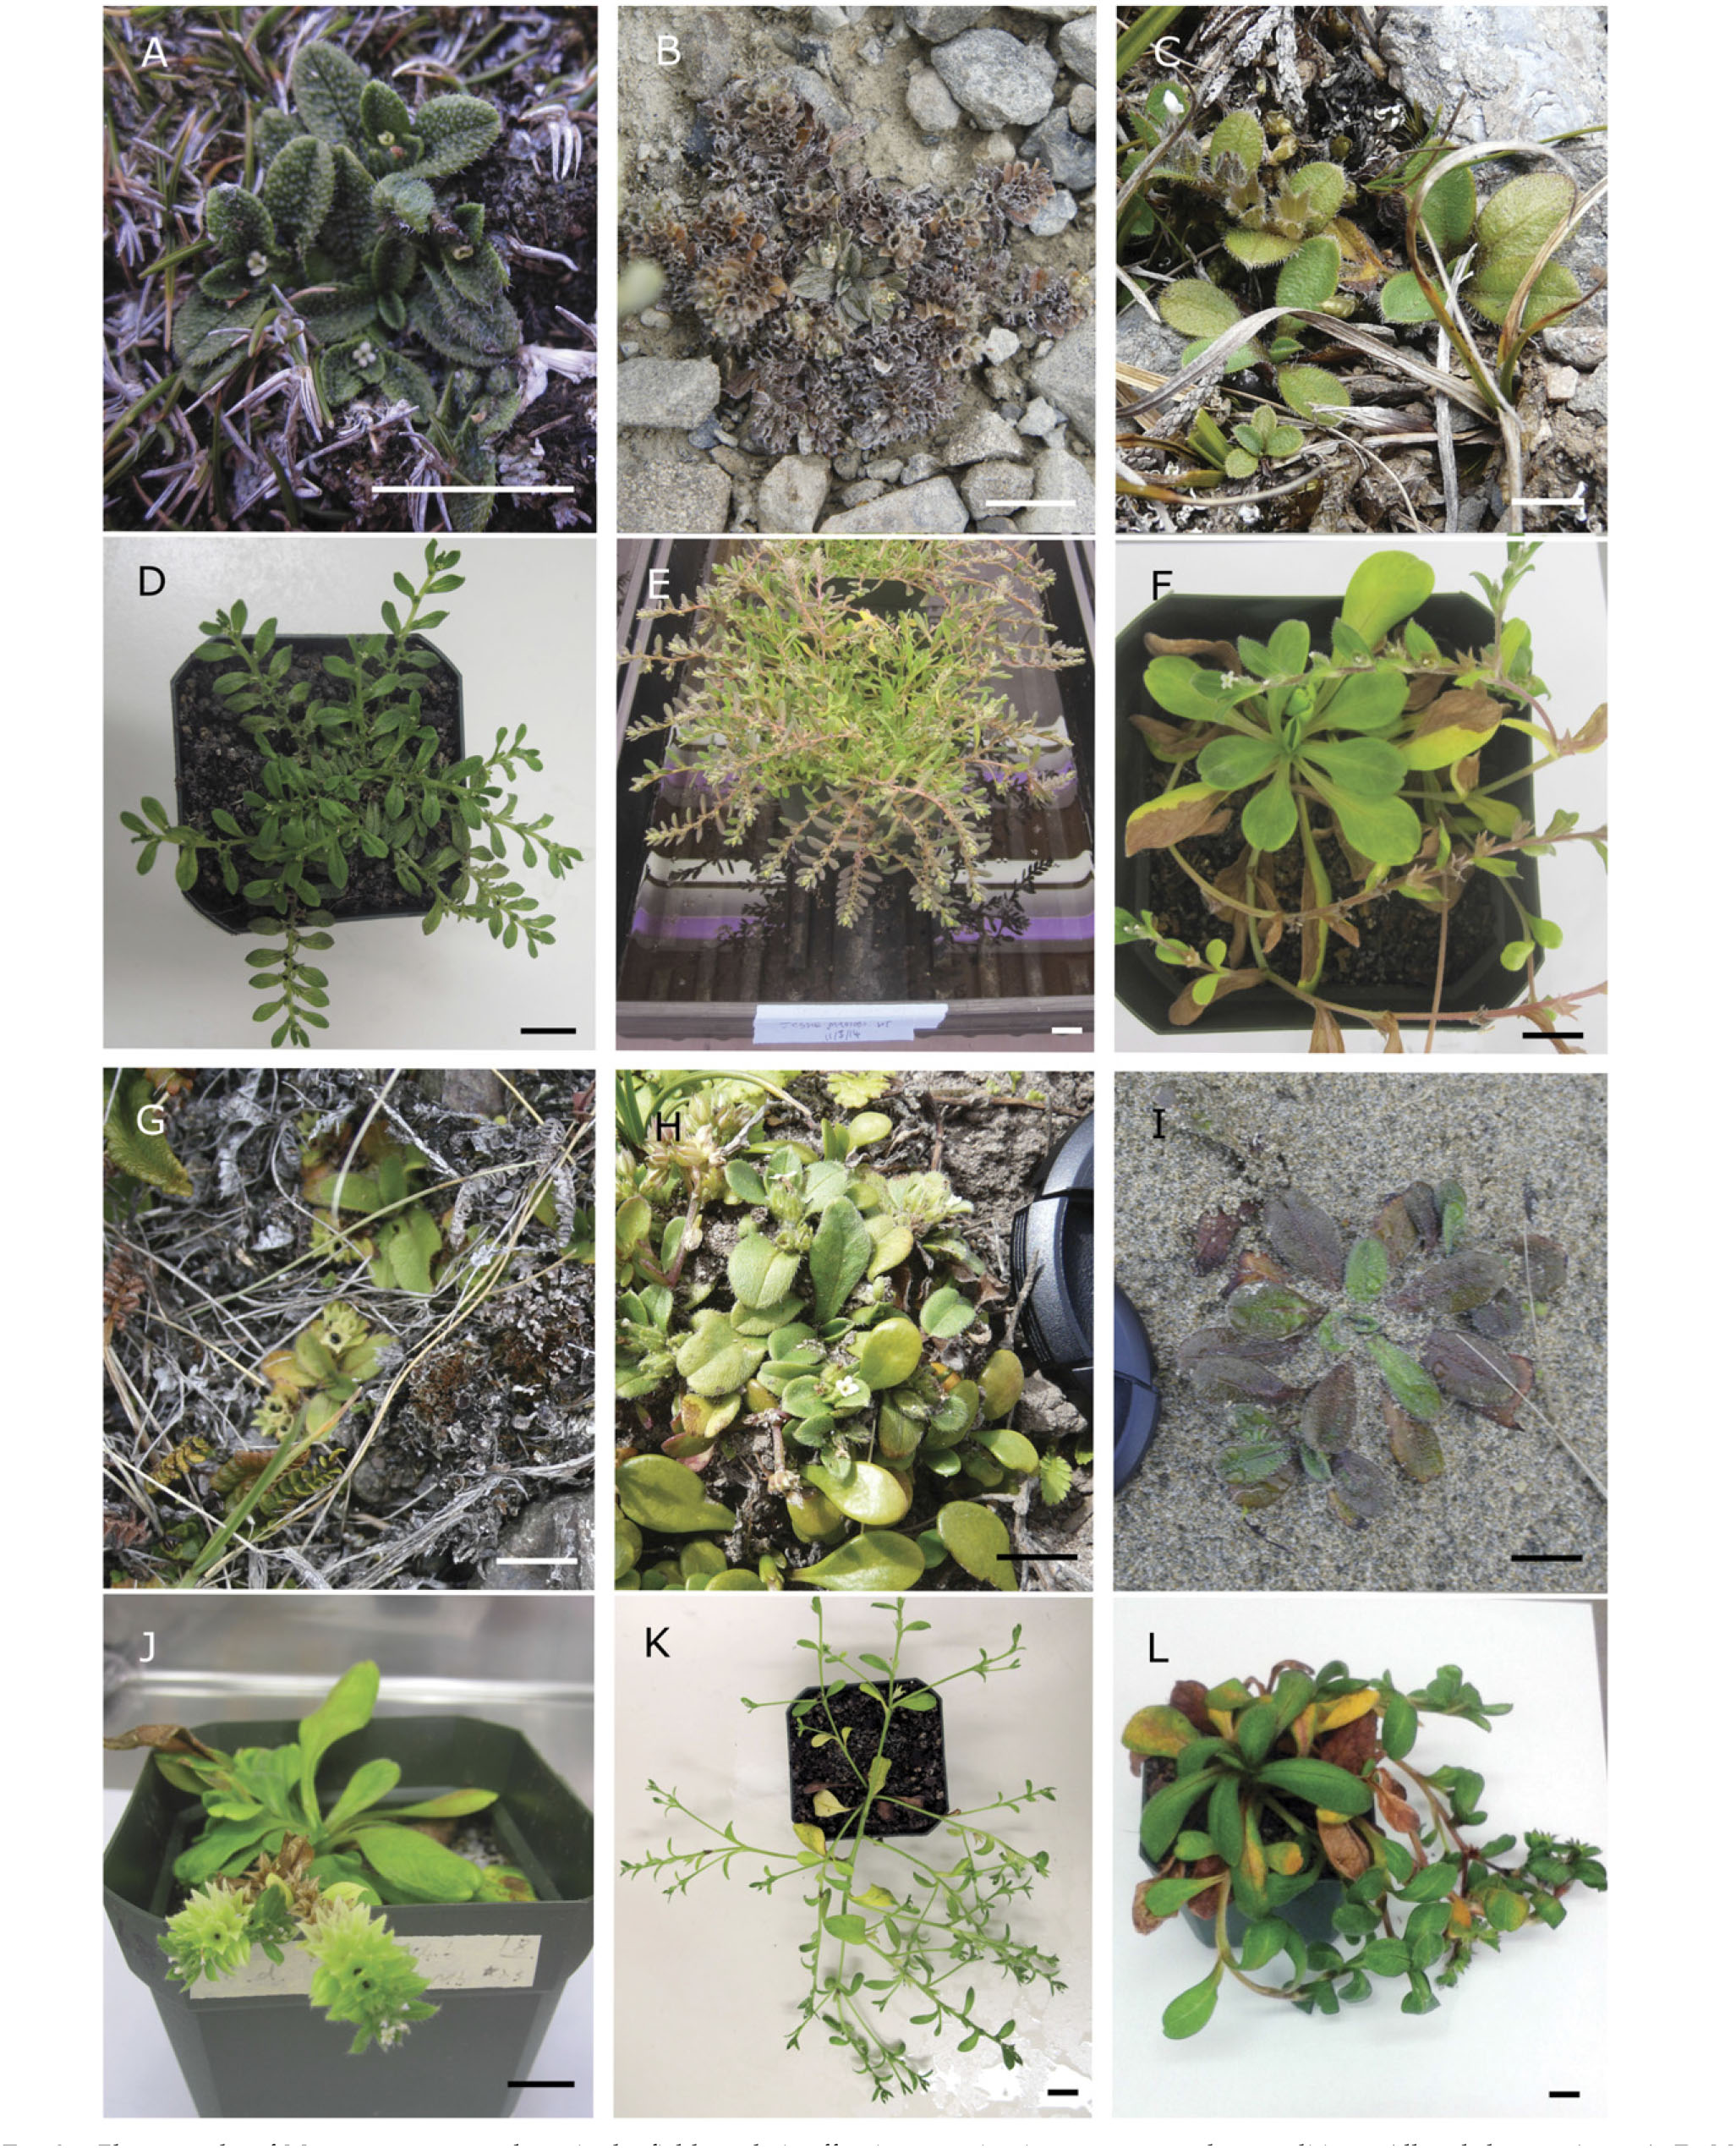 Bolstering Species Delimitation In Difficult Species Complexes By